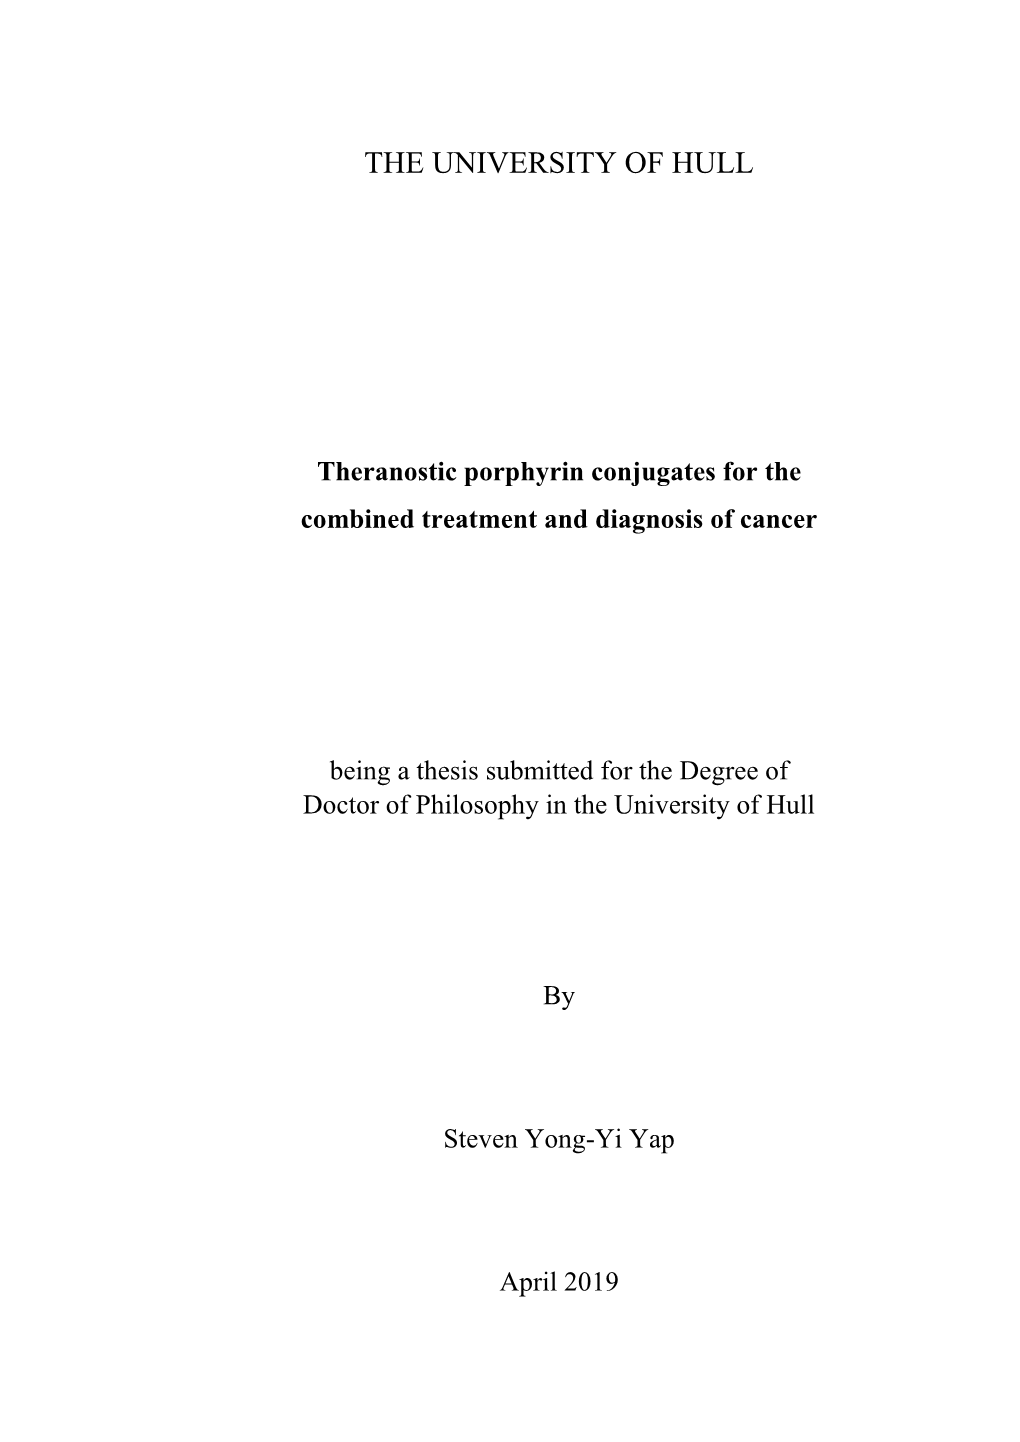 Thesis Submitted for the Degree of Doctor of Philosophy in the University of Hull